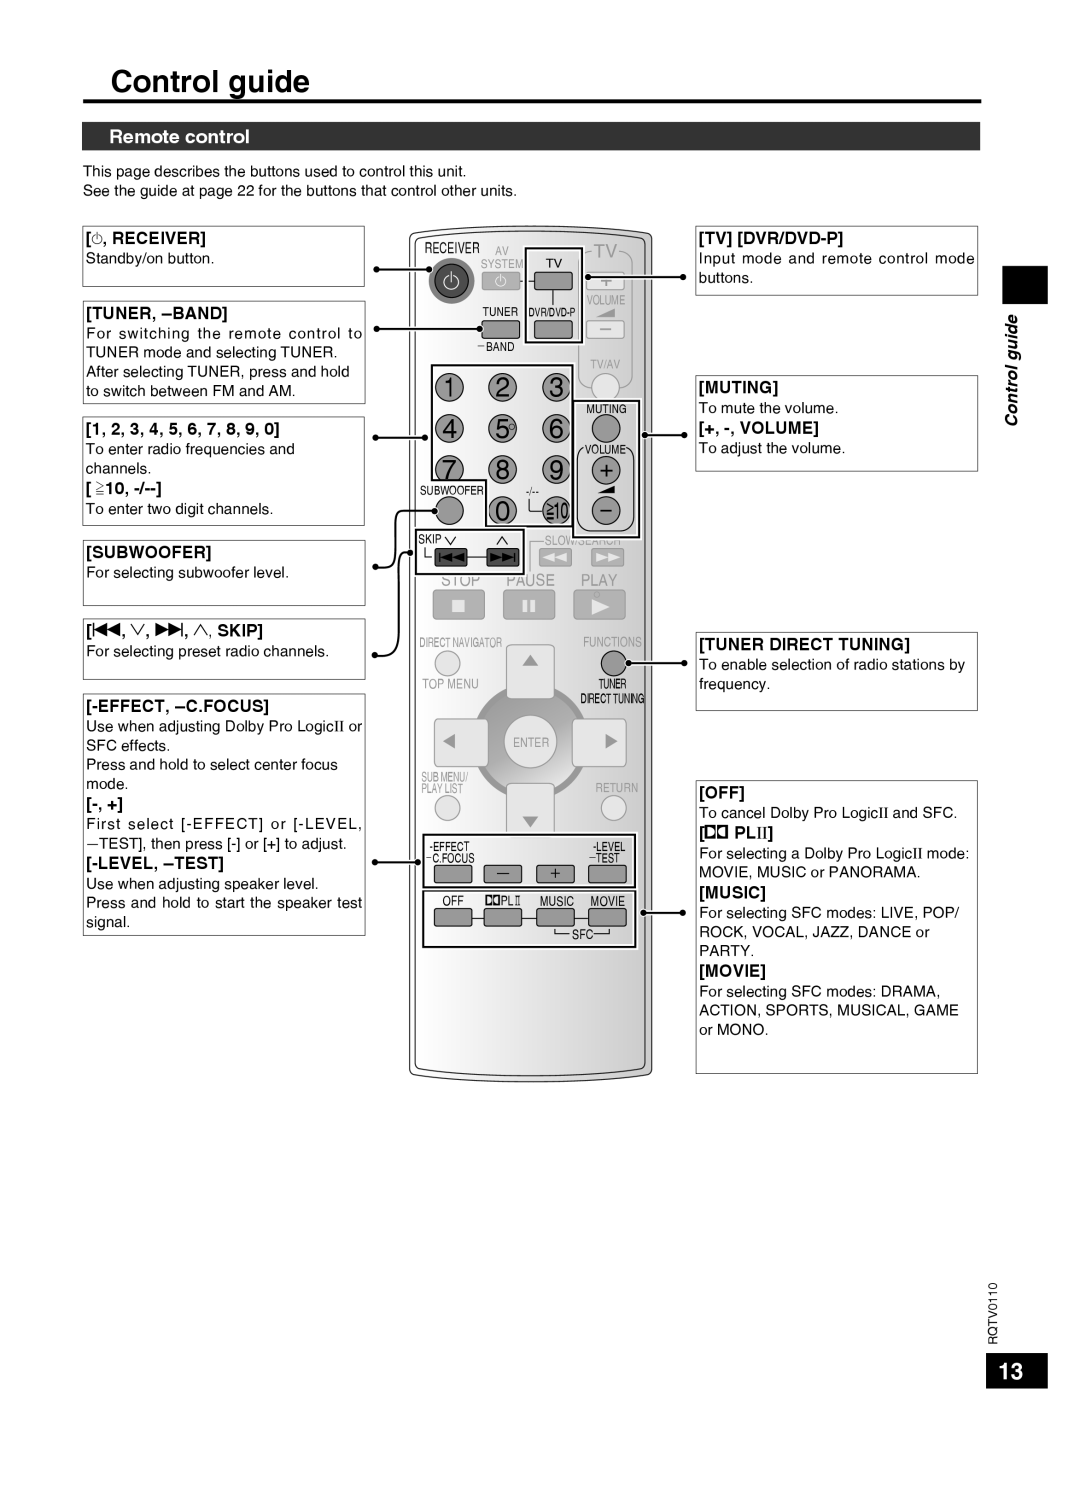 Panasonic SC-HT60 specifications Control guide, Remote control, Stop, Play, Muting, +, -,Volume 